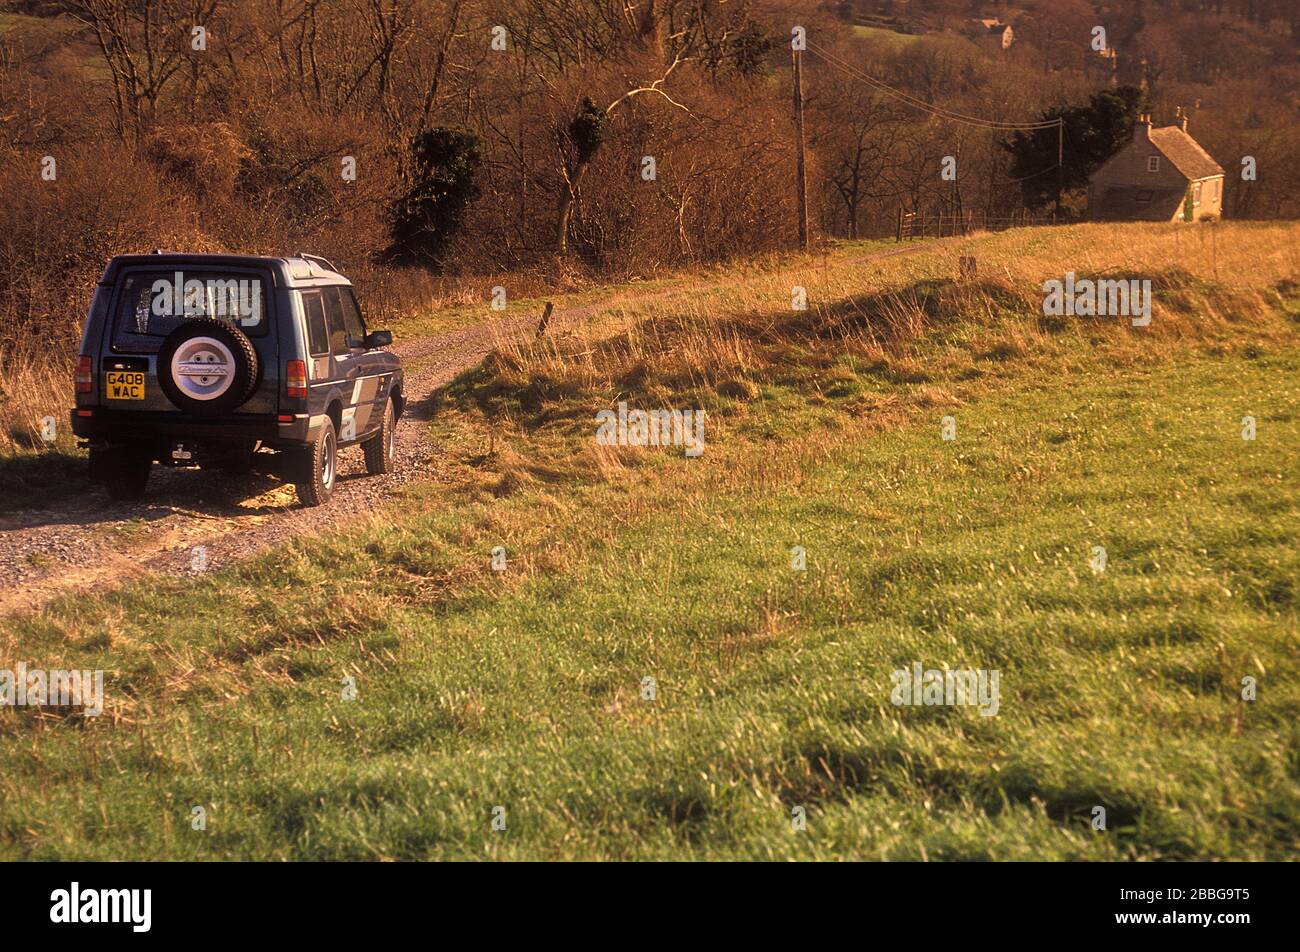 1990 Land Rover Discovery Series1 Stock Photo